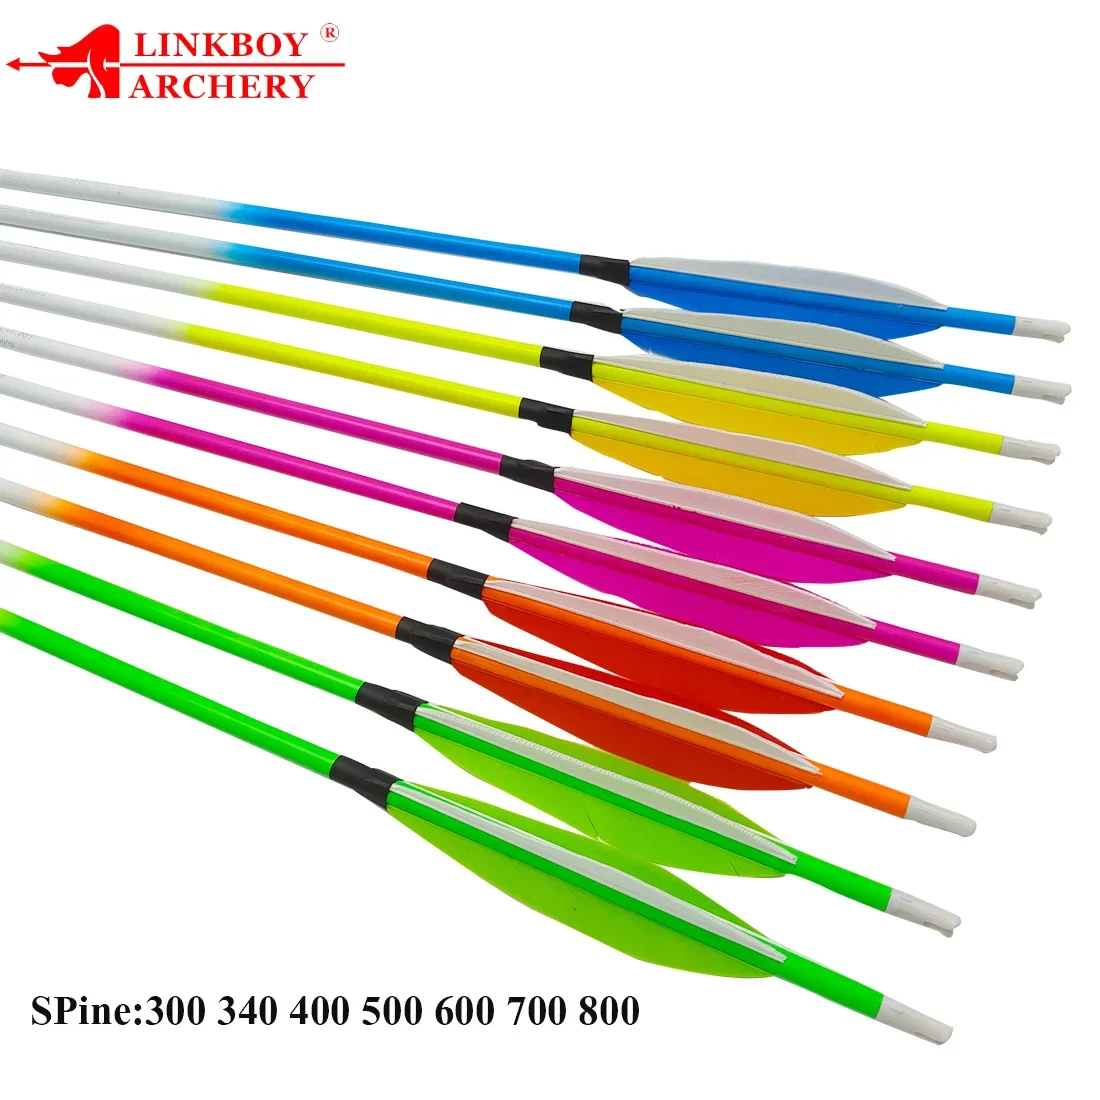 

6PCS Linkboy Archery Carbon Arrow Sp340 32inch 5inch Turkey Banana Feather 100gr Tips Traditional Bow Hunting